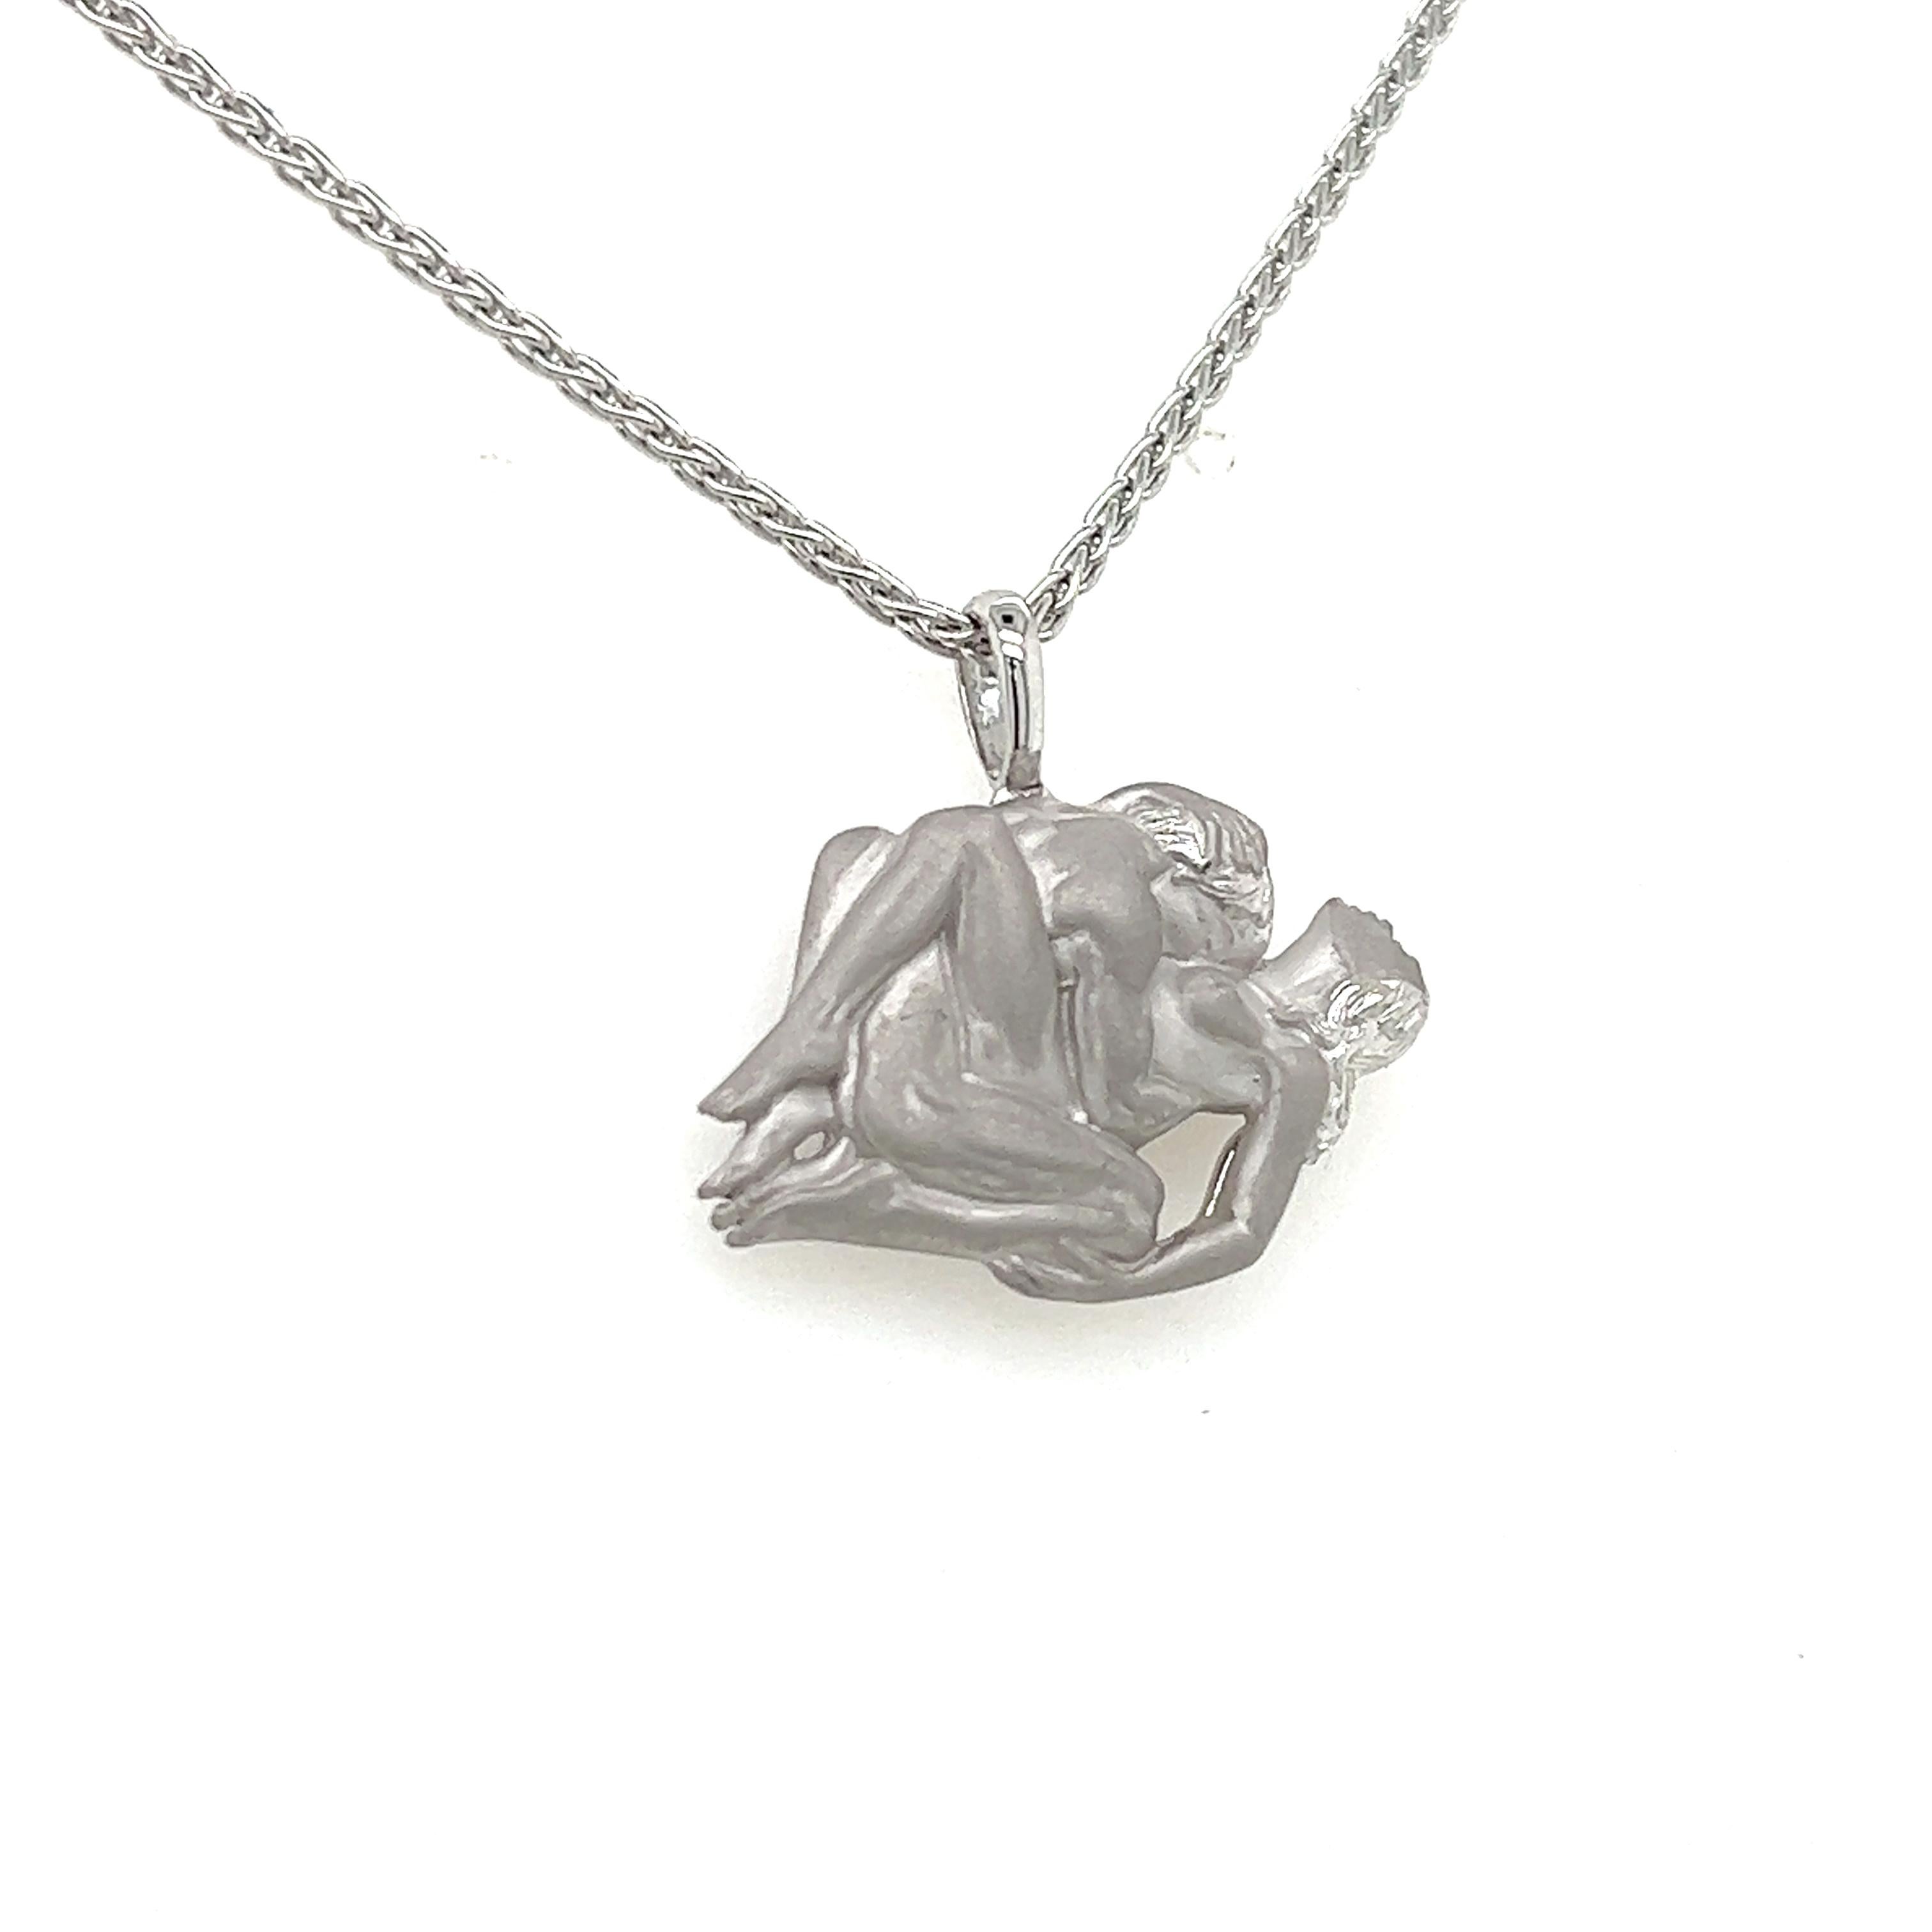 Beautiful erotic necklace crafted by famed designer Carrera Y Carrera. The necklace is crafted in 18k white gold and depicts a love scene between a man and woman.
The design shows Carrera Y Carrera's artistic touch as both  satin and high polish